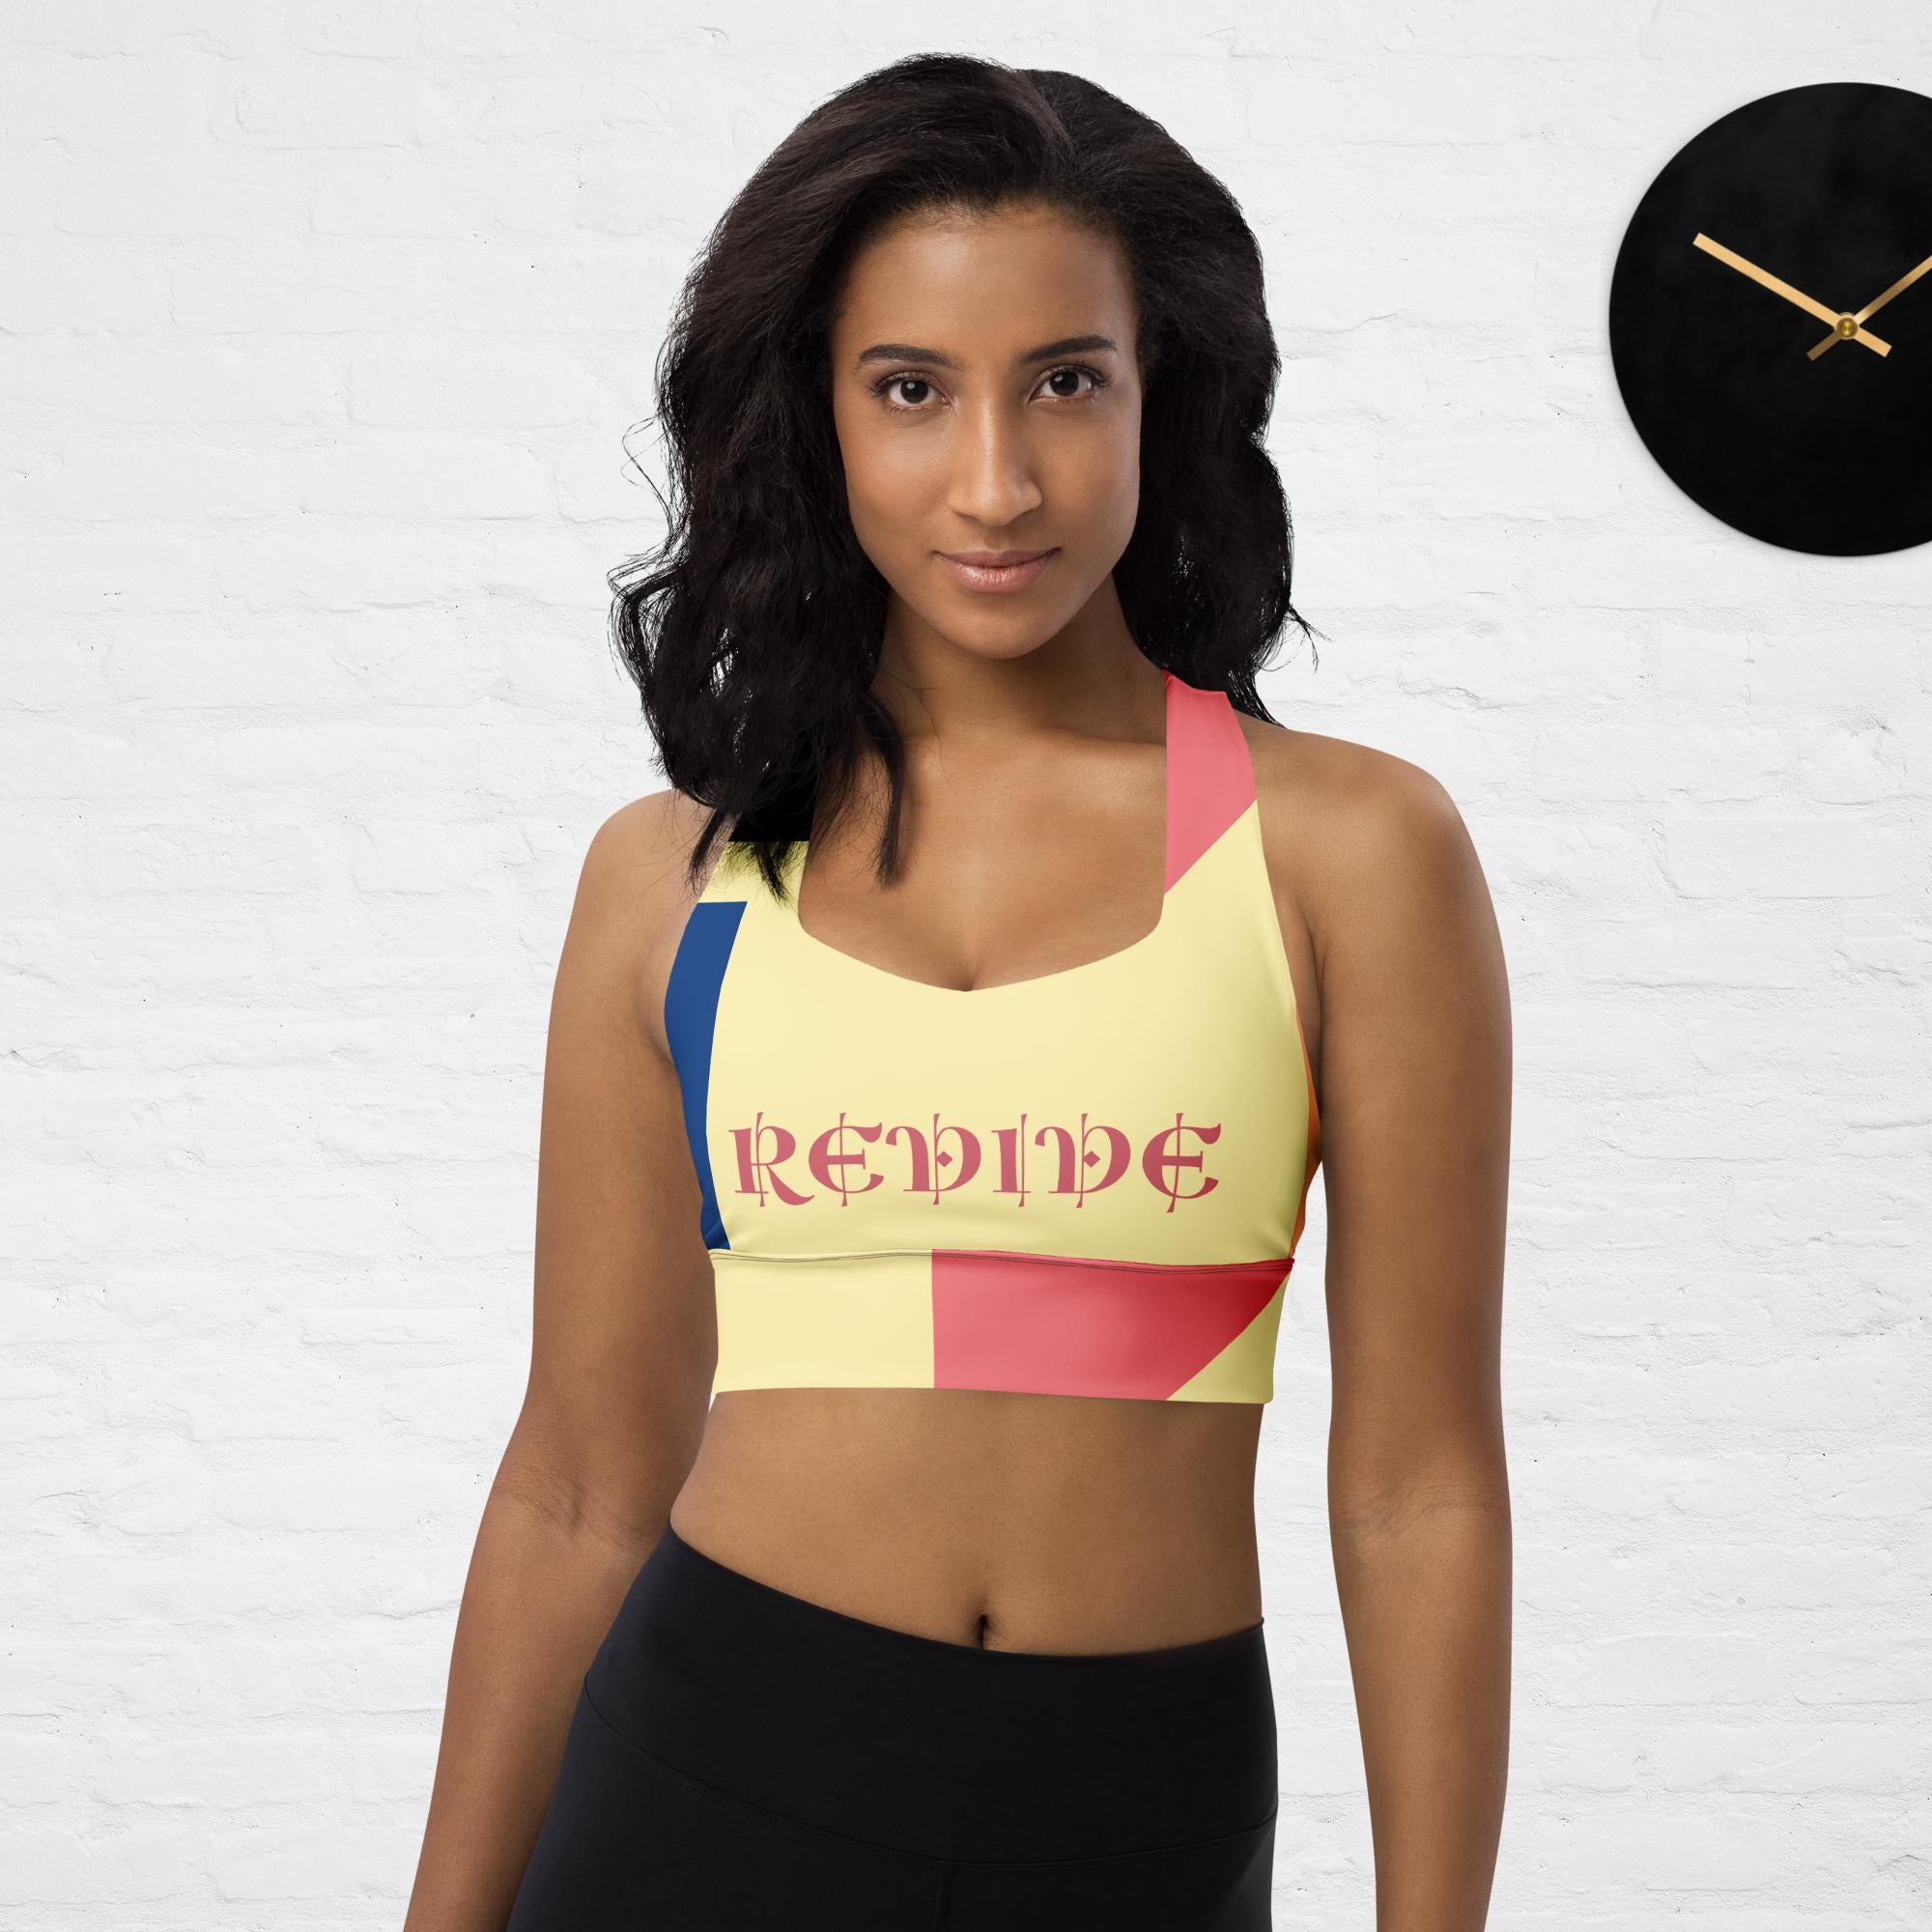 Activewear Longline Sports Bra in Abstract Print - Revive Wear     Comfortable Activewear Bra. Enjoy a supportive fit with our Longline Sports Bra, designed for maximum comfort during workouts. Browse your size today at Revive Wear.